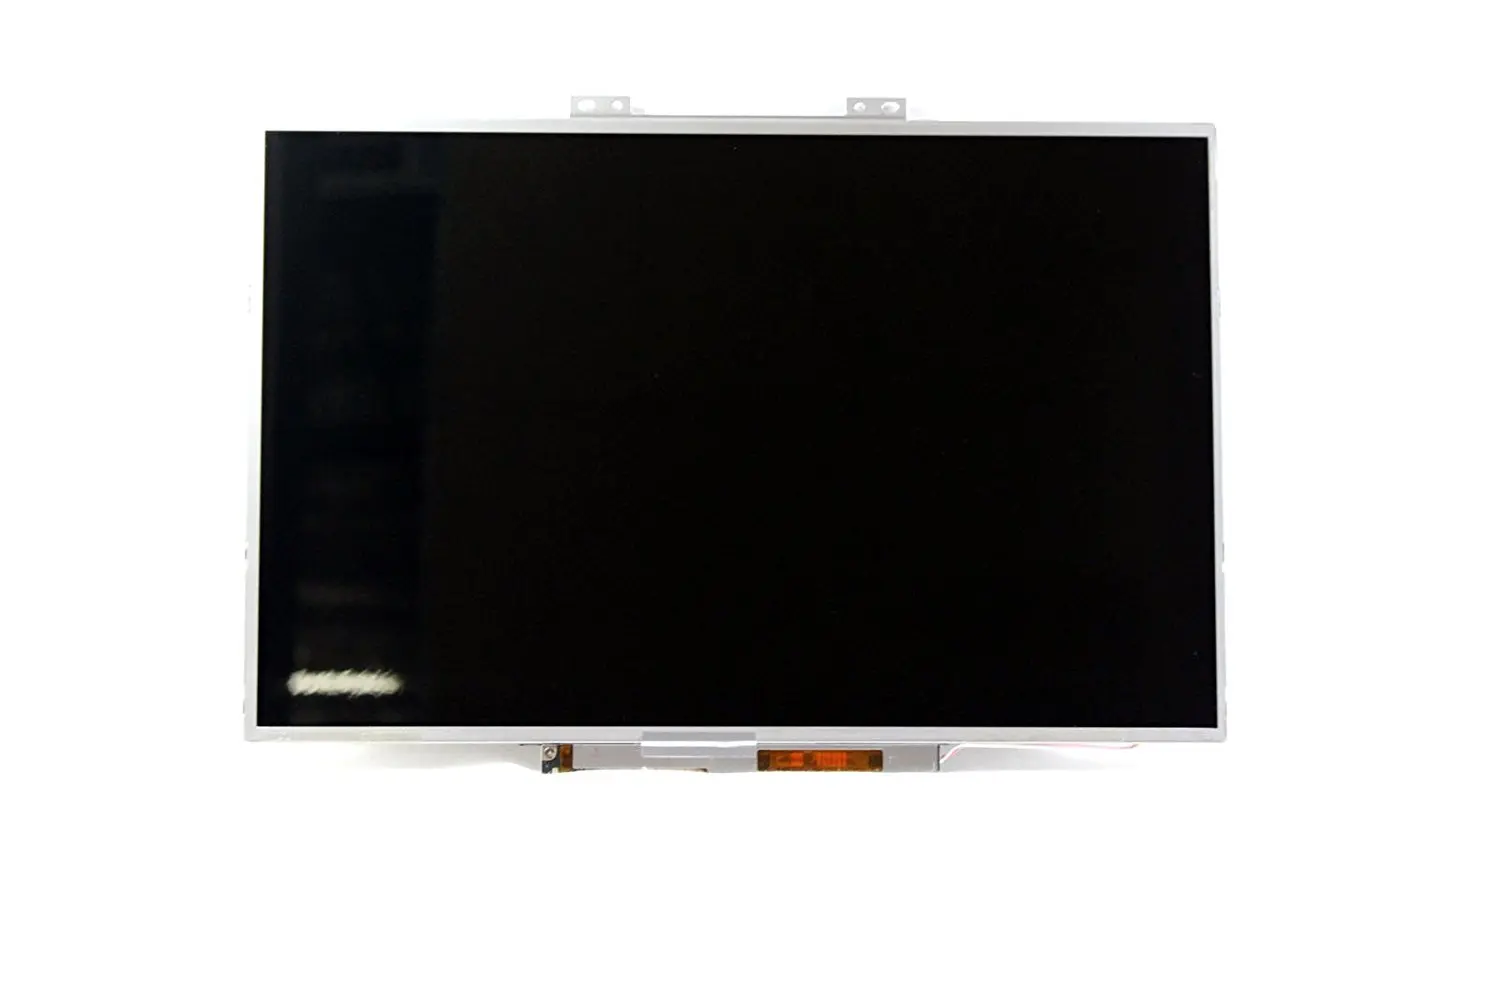 Cheap Latitude D830 Lcd, find Latitude D830 Lcd deals on line at